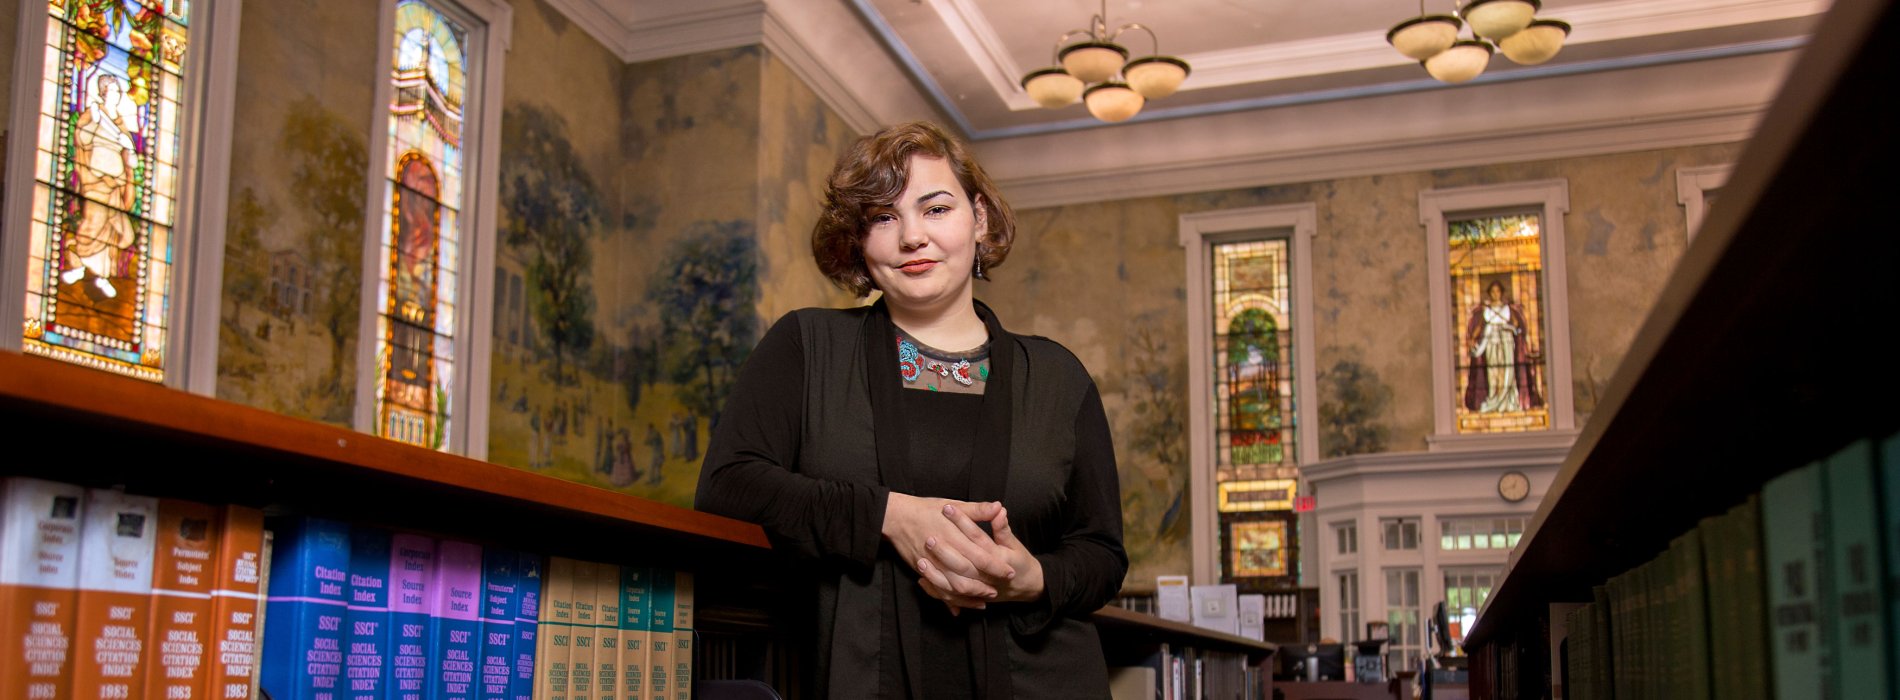 A woman in a black sweater stands inside an ornately decorated library.